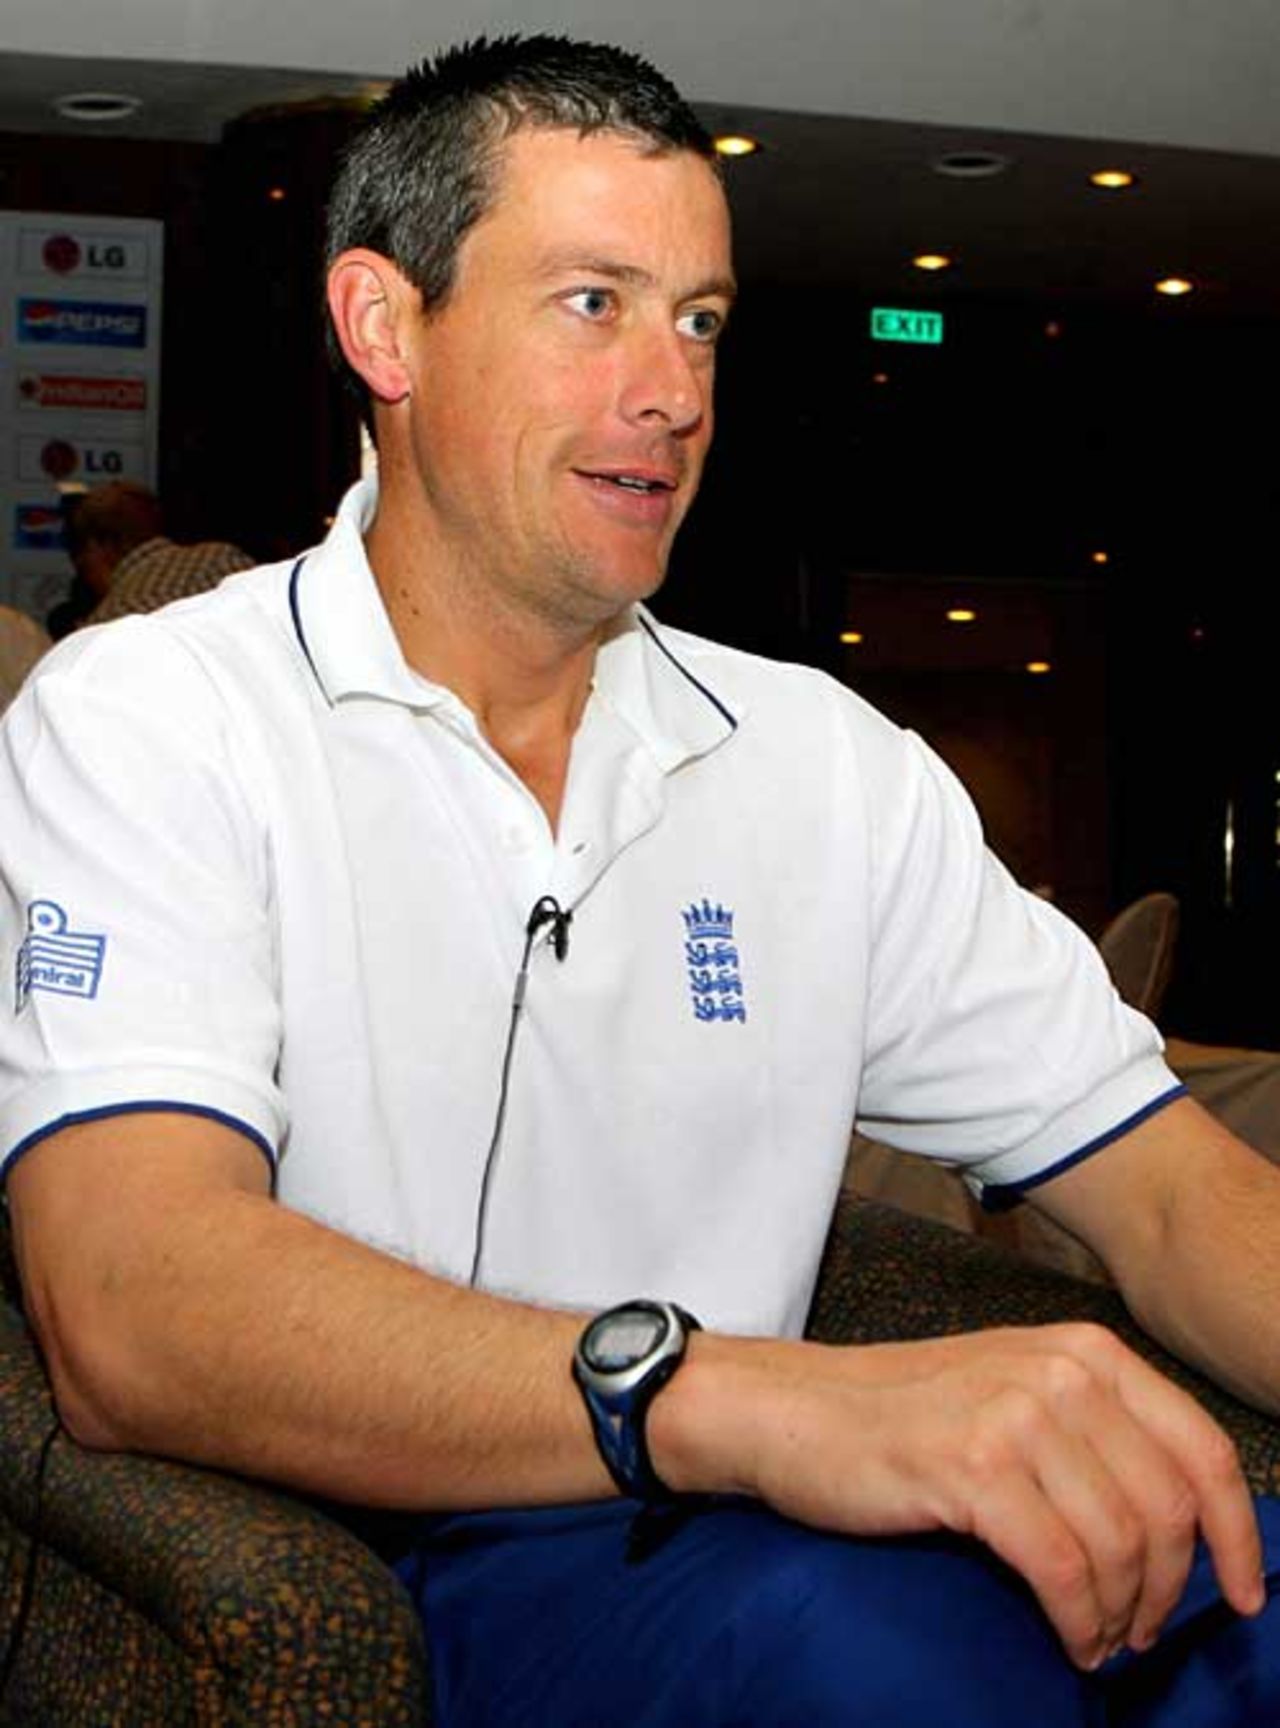 Ashley Giles, a non-playing member of England's squad, speaks to the media at an opening session in the team hotel, New Delhi, October 8, 2006